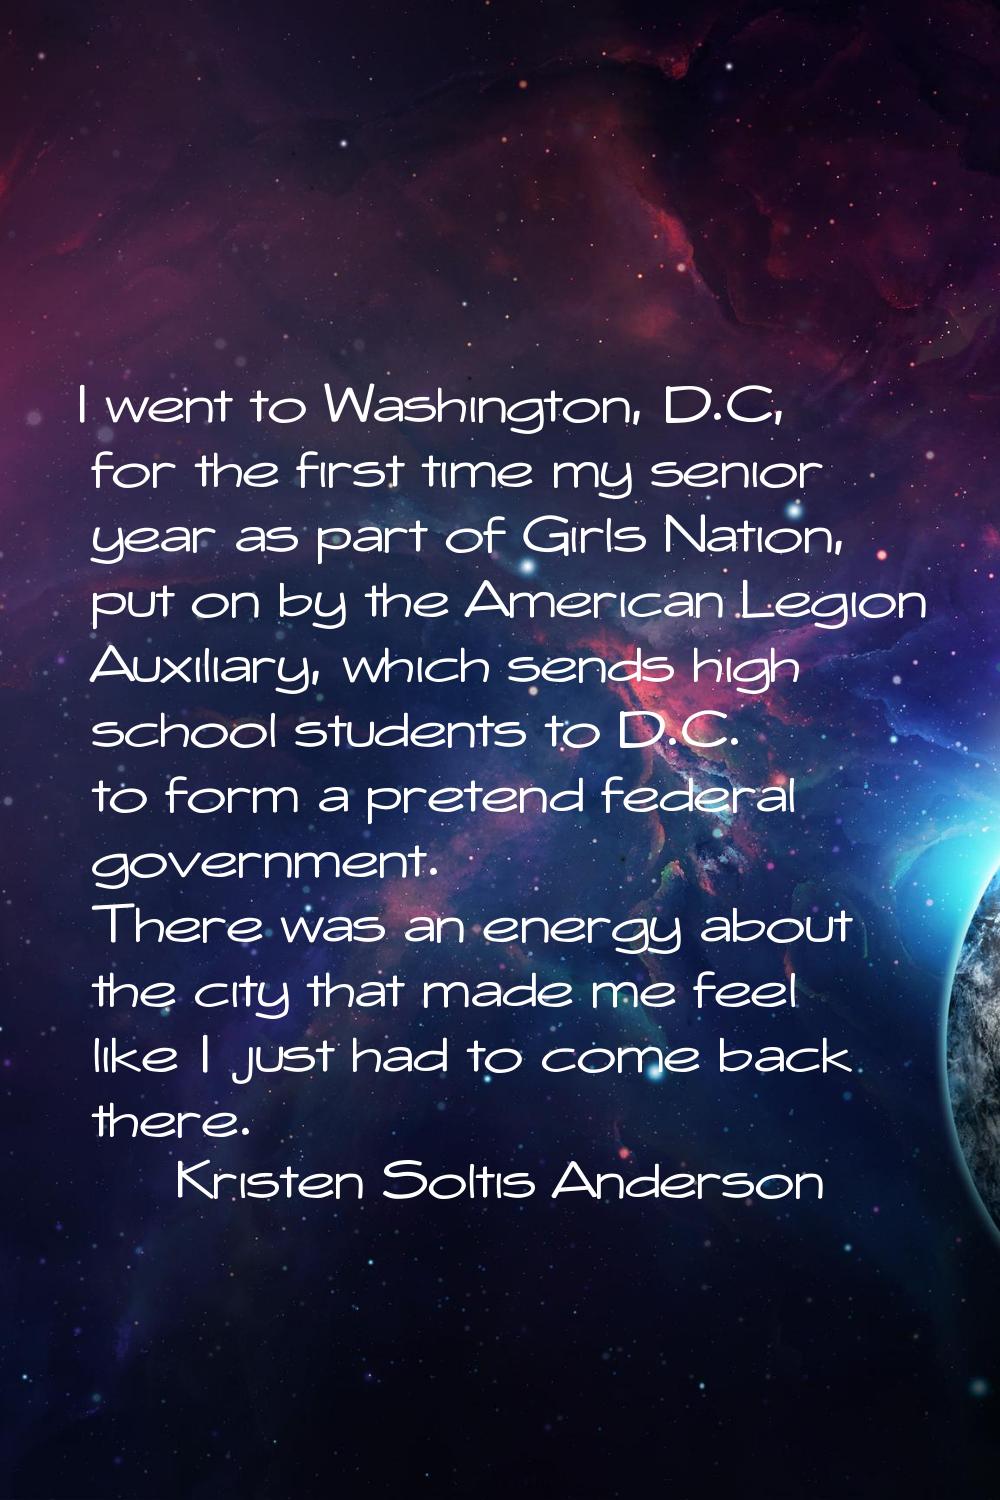 I went to Washington, D.C, for the first time my senior year as part of Girls Nation, put on by the